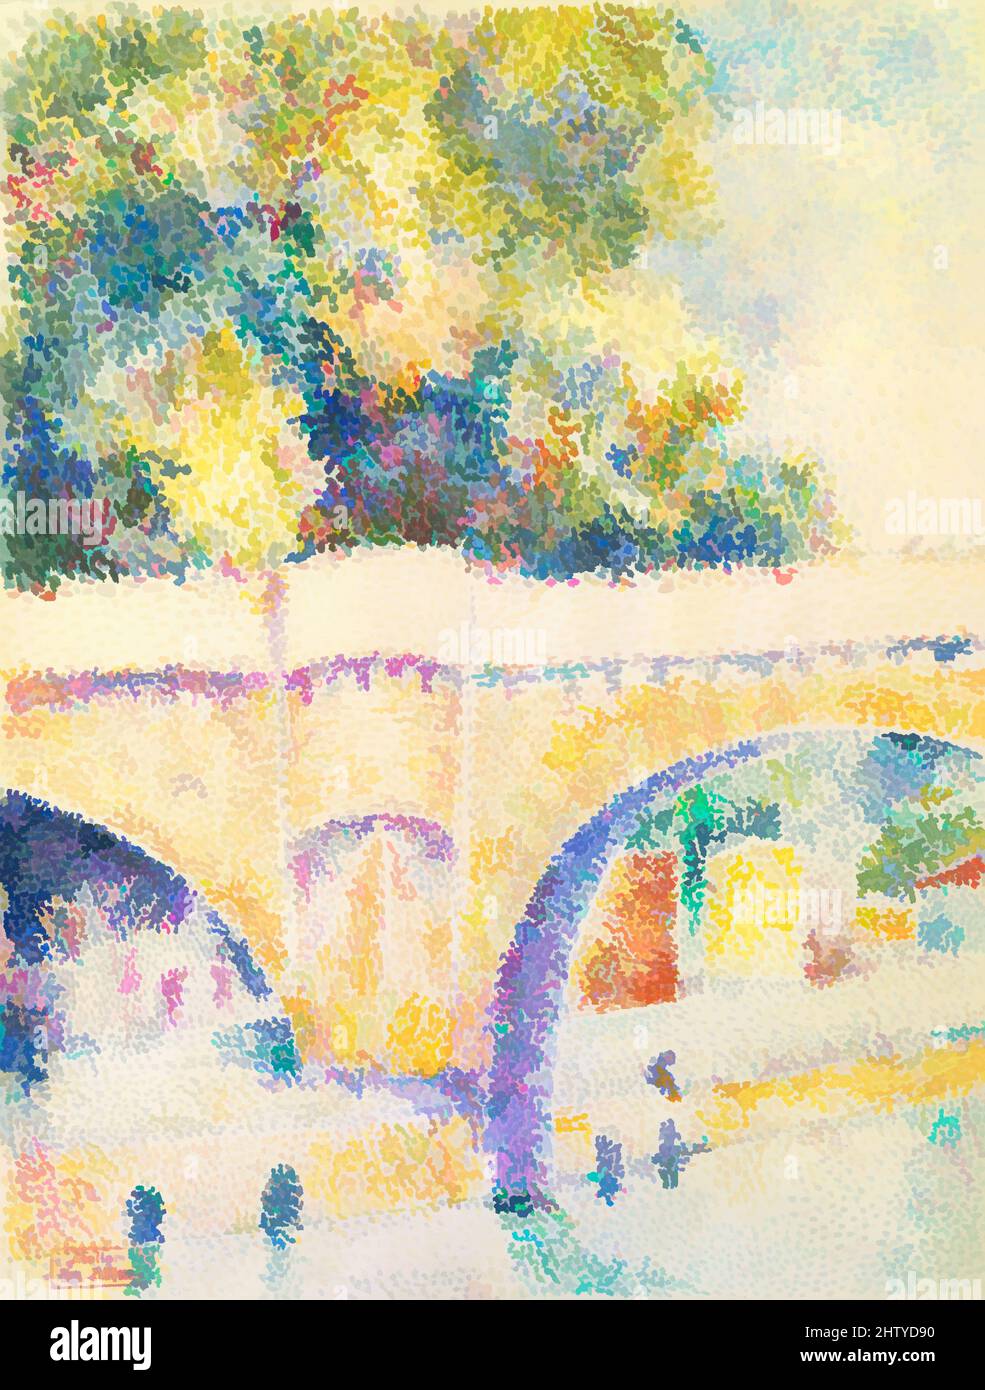 Art inspired by Le Pont Neuf, ca. 1912–14, Watercolor and gouache on cream wove paper, upper edge torn from notebook, 9 13/16 x 7 1/2 in. (25 x 19 cm), Drawings, Hippolyte Petitjean (French, Mâcon 1854–1929 Paris), Hippolyte Petitjean mastered to perfection the Neo-Impressionist, Classic works modernized by Artotop with a splash of modernity. Shapes, color and value, eye-catching visual impact on art. Emotions through freedom of artworks in a contemporary way. A timeless message pursuing a wildly creative new direction. Artists turning to the digital medium and creating the Artotop NFT Stock Photo